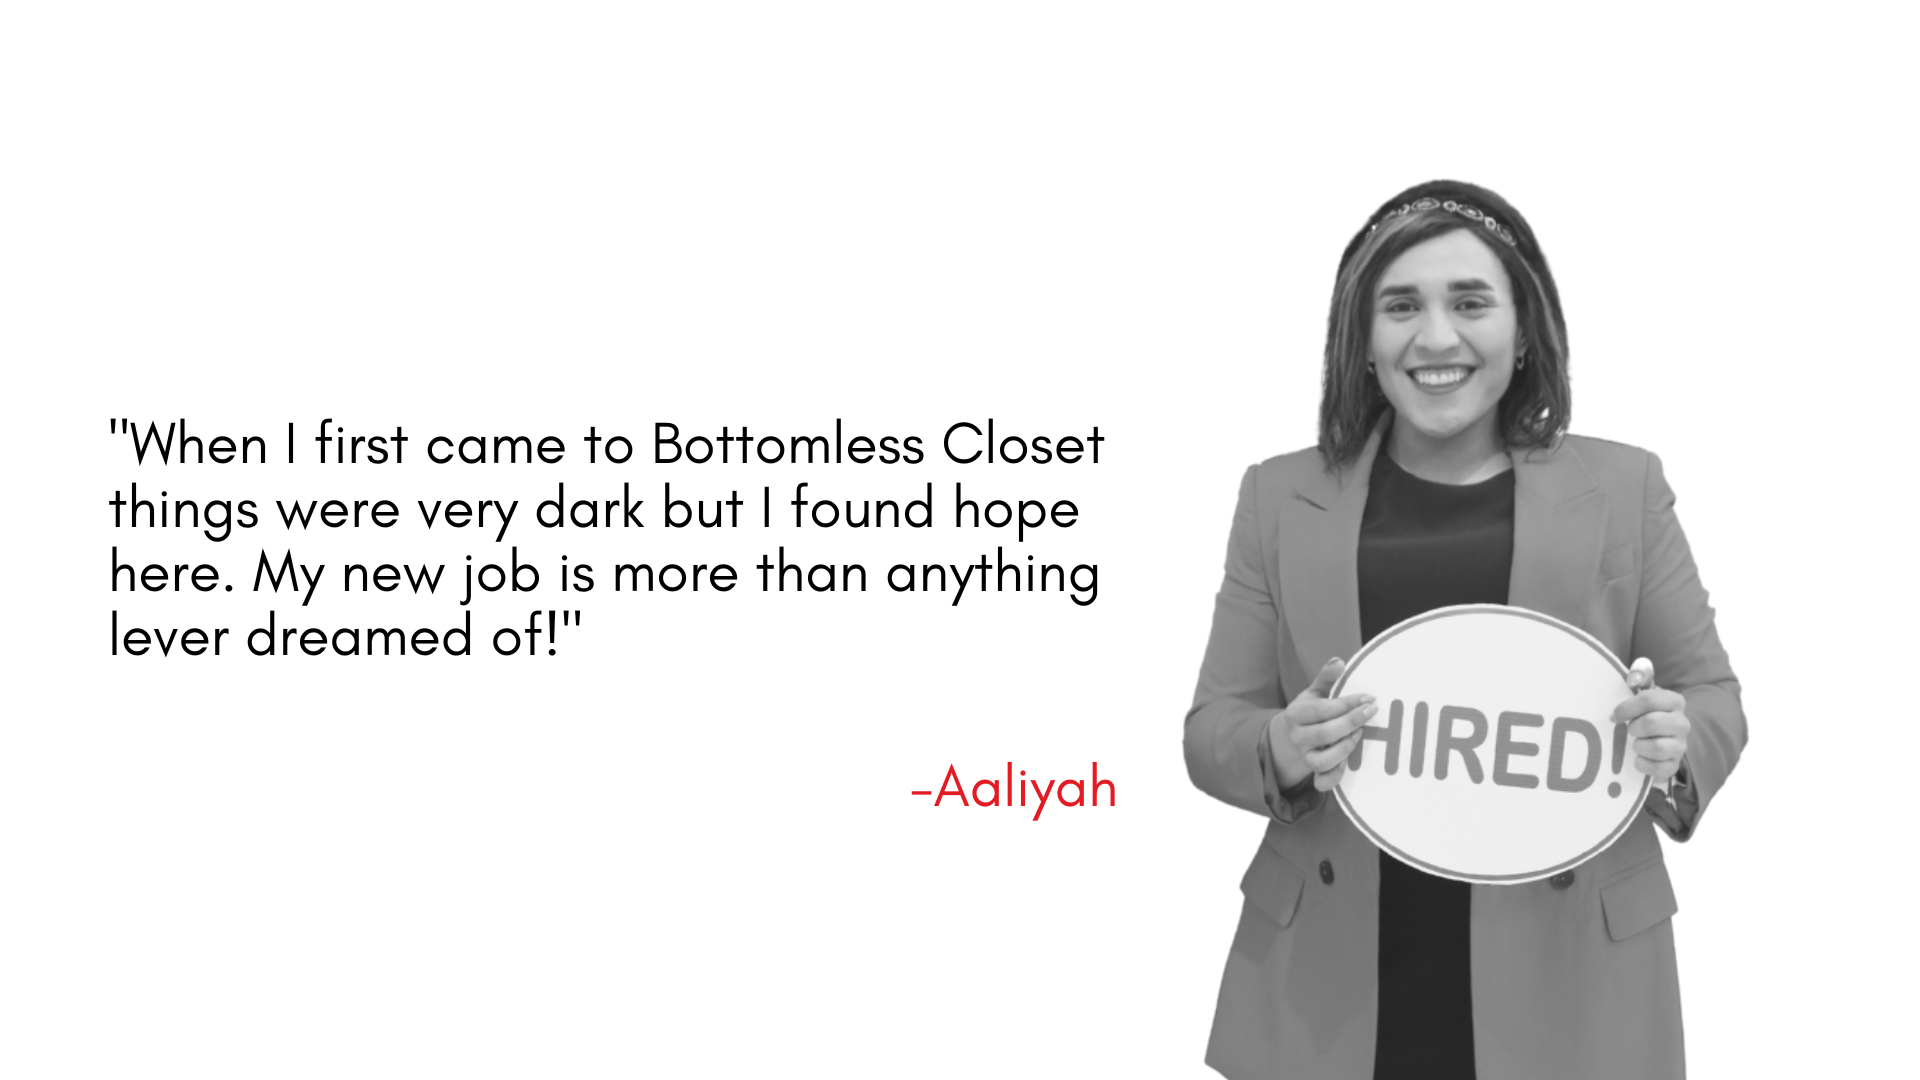 "When I first came to Bottomless Closet things were very dark but I found hope here. My new job is more than anything lever dreamed of!"